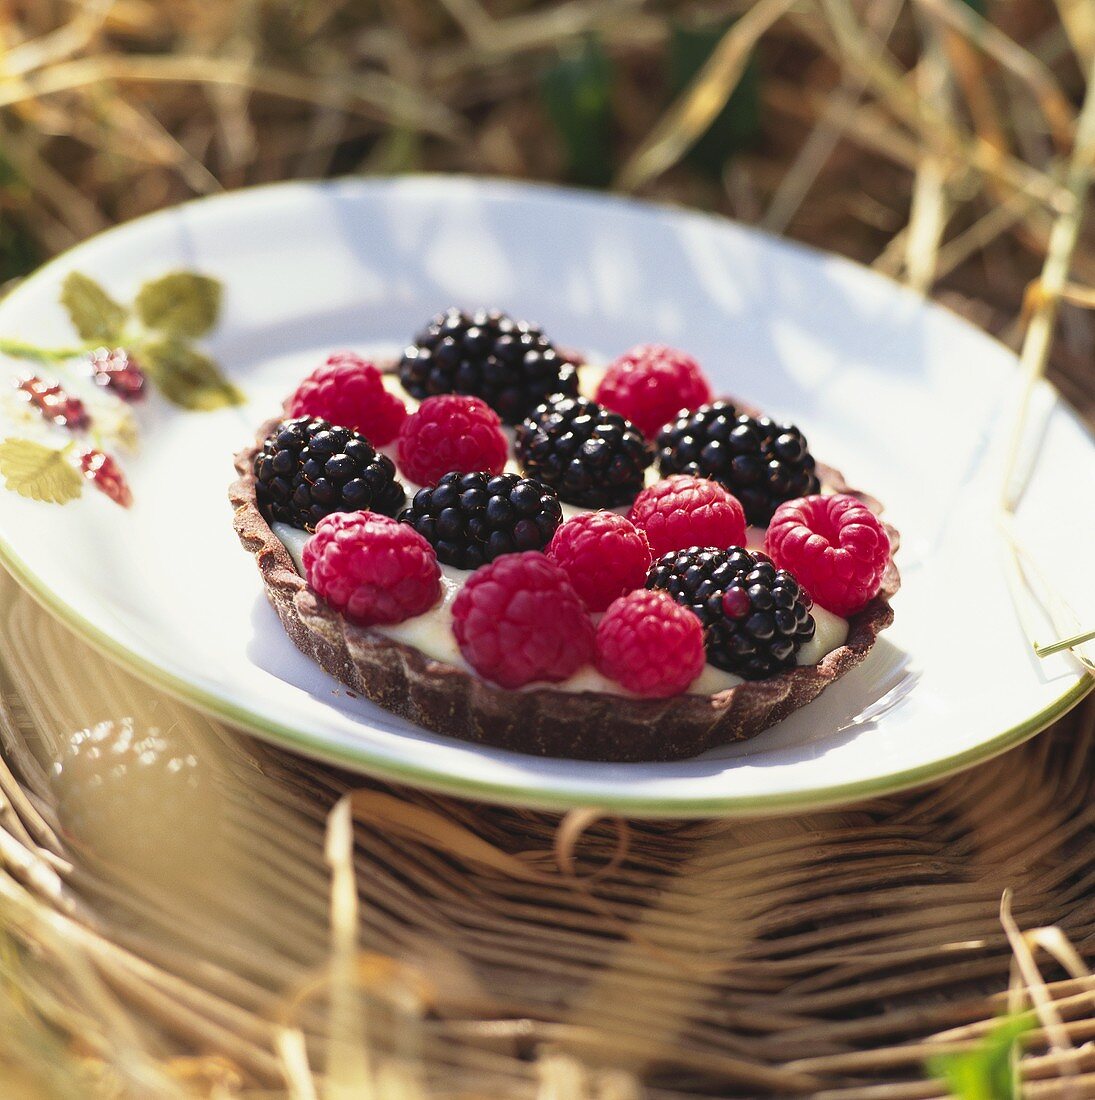 Berry tartlet on a plate on wicker tray